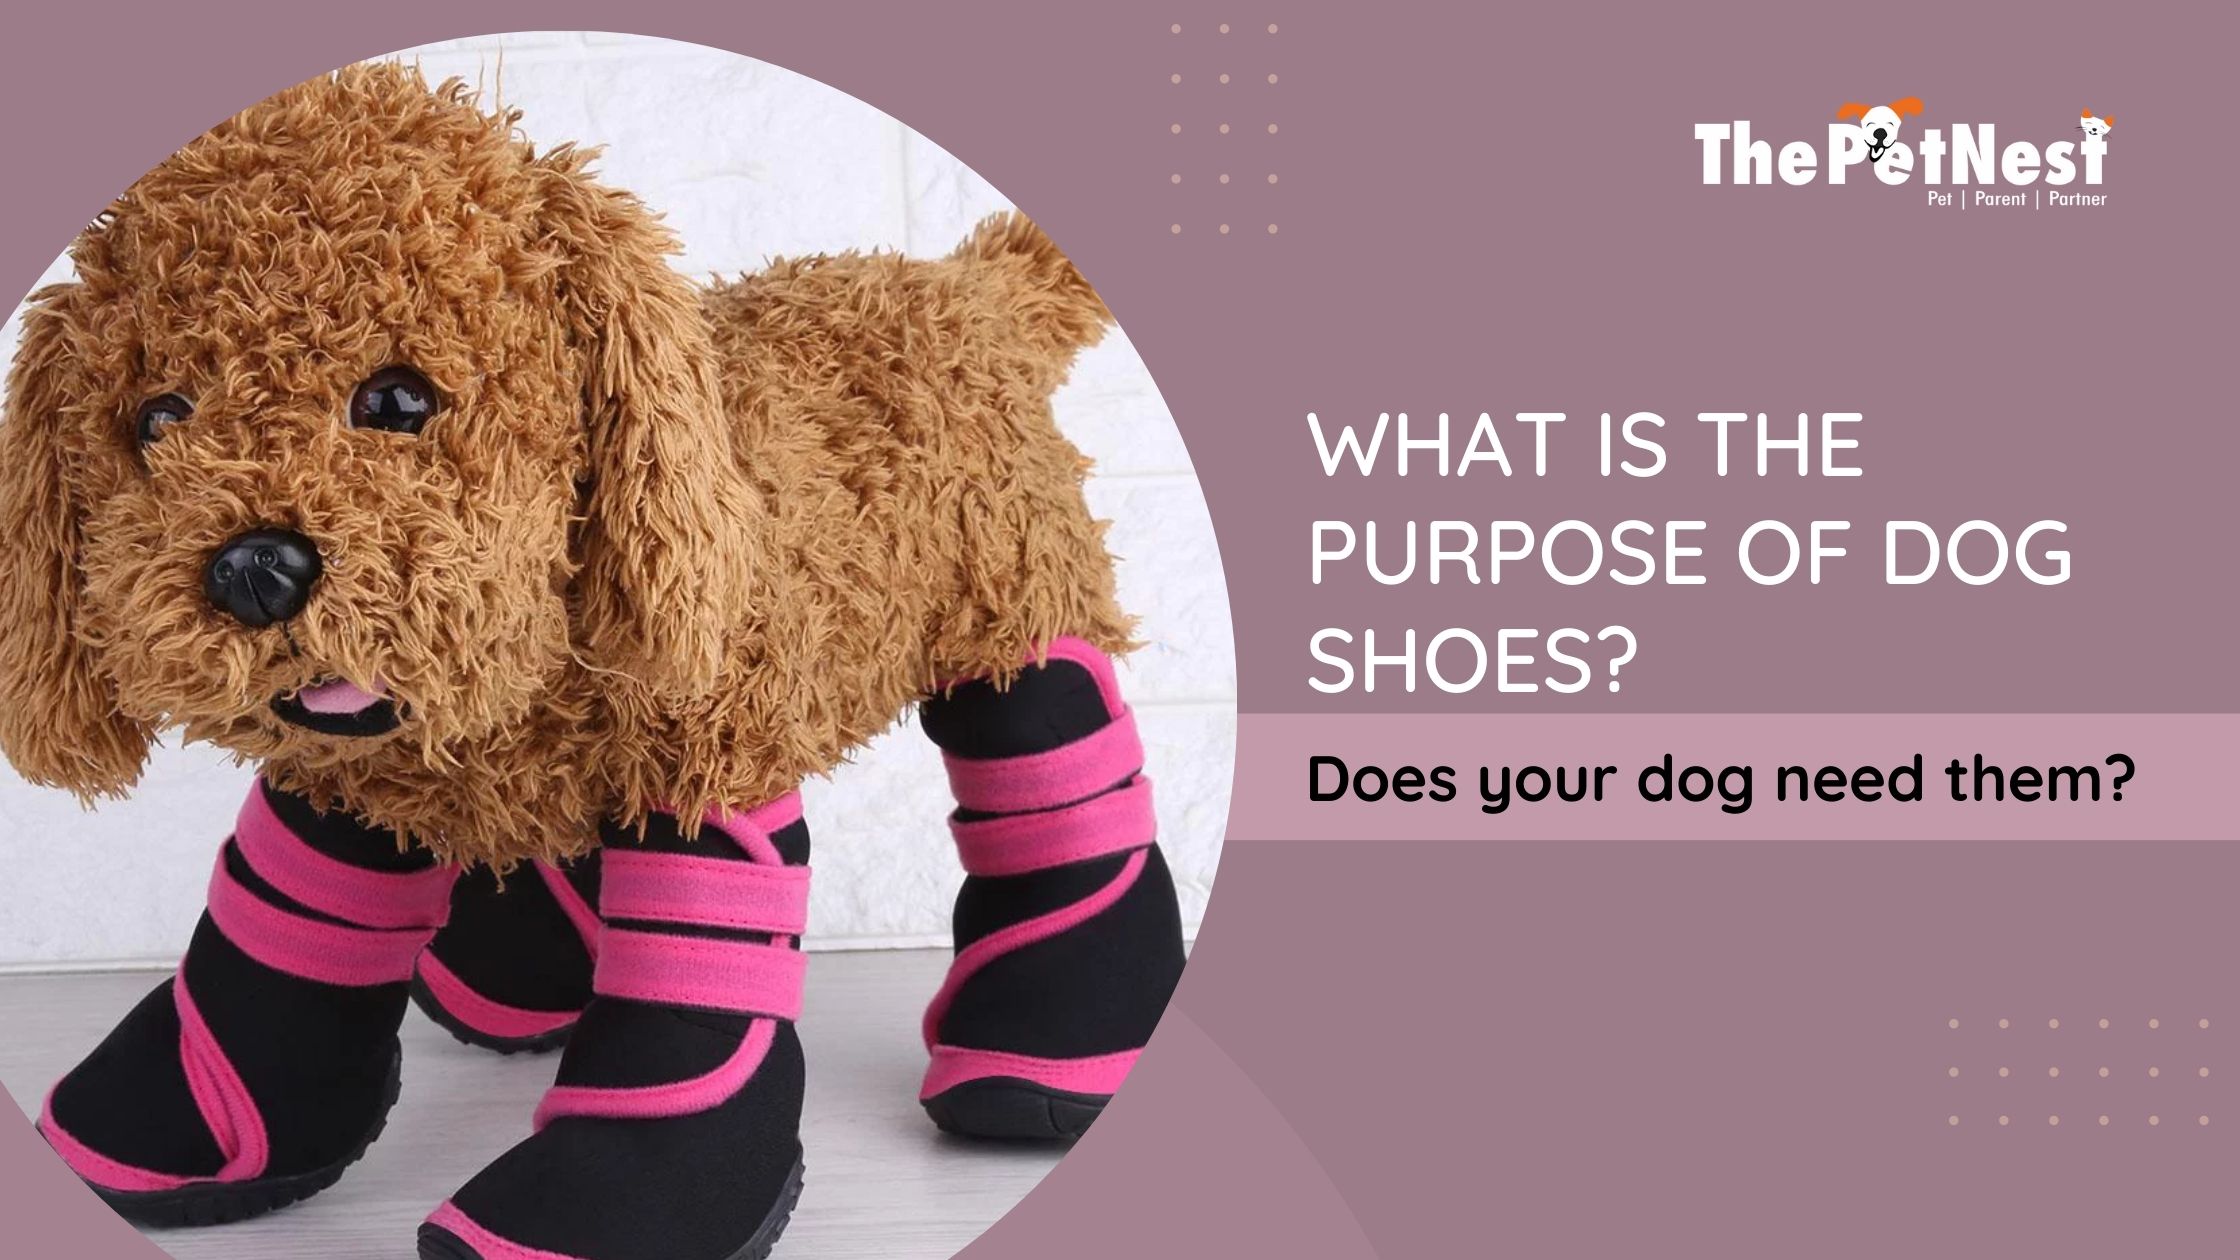 What is the purpose of dog shoes? Does your dog need them?